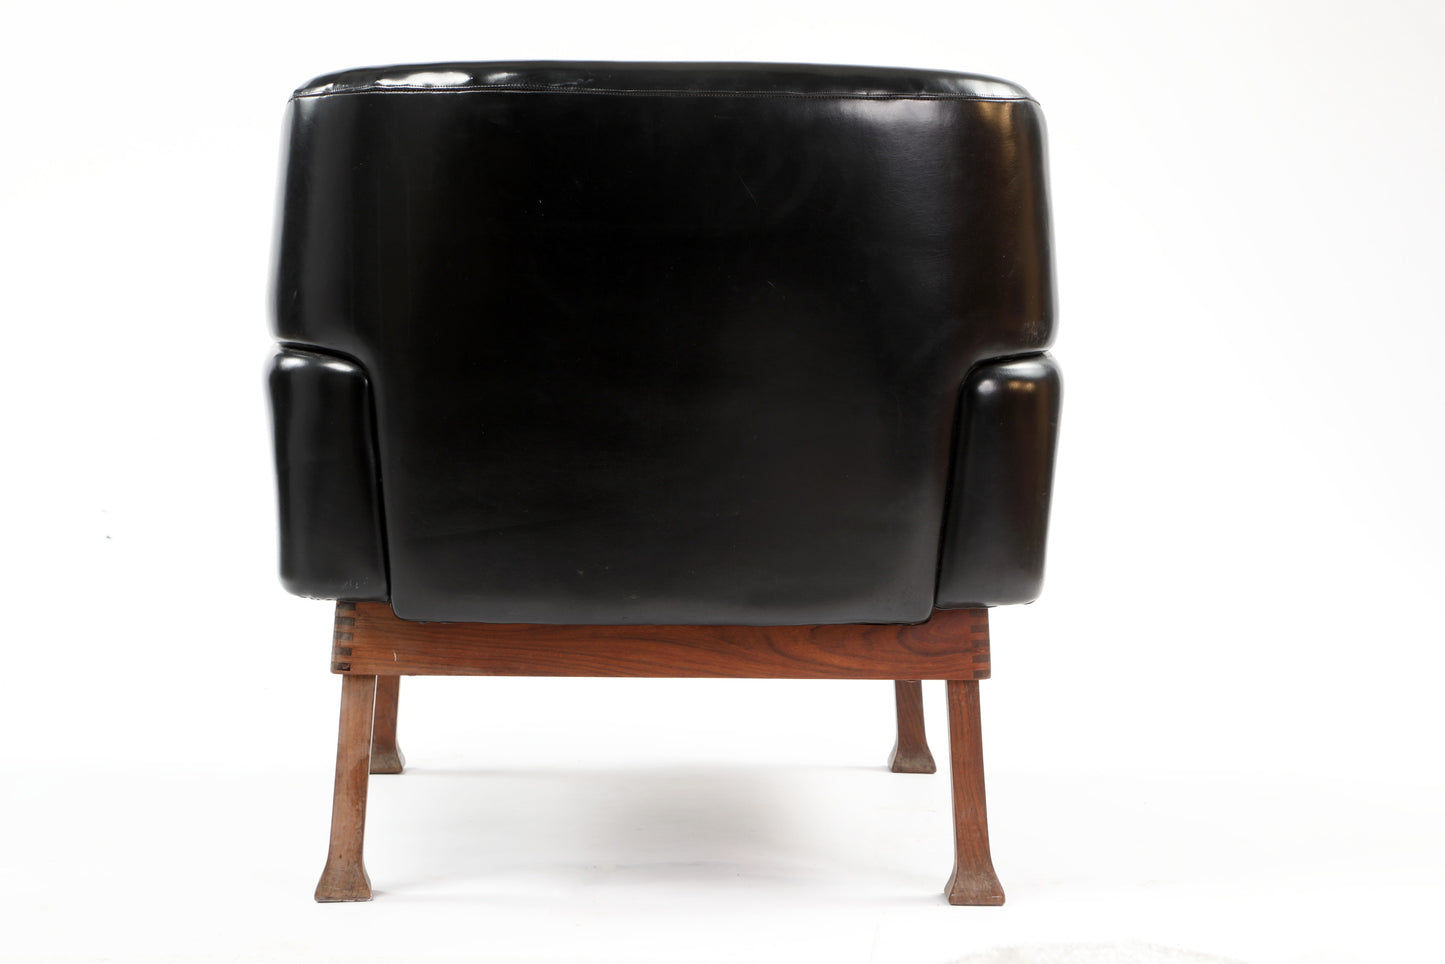 Allegra armchair by Piero Ranzani for Elam from the 60s